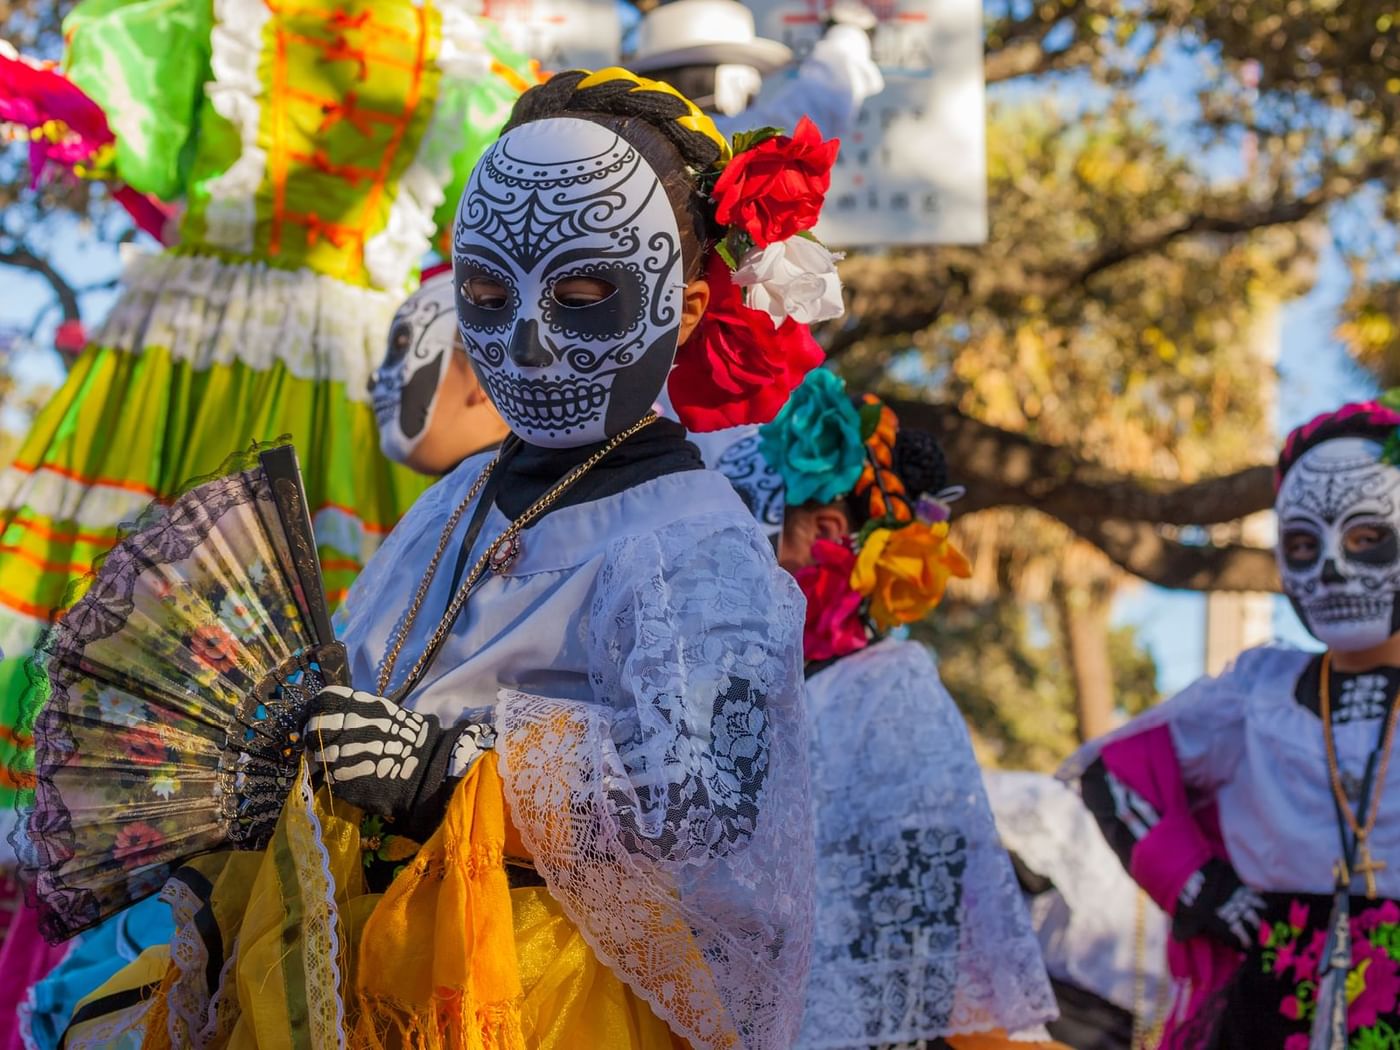 People in colorful costumes celebrate the day of the dead near Grand Fiesta Americana